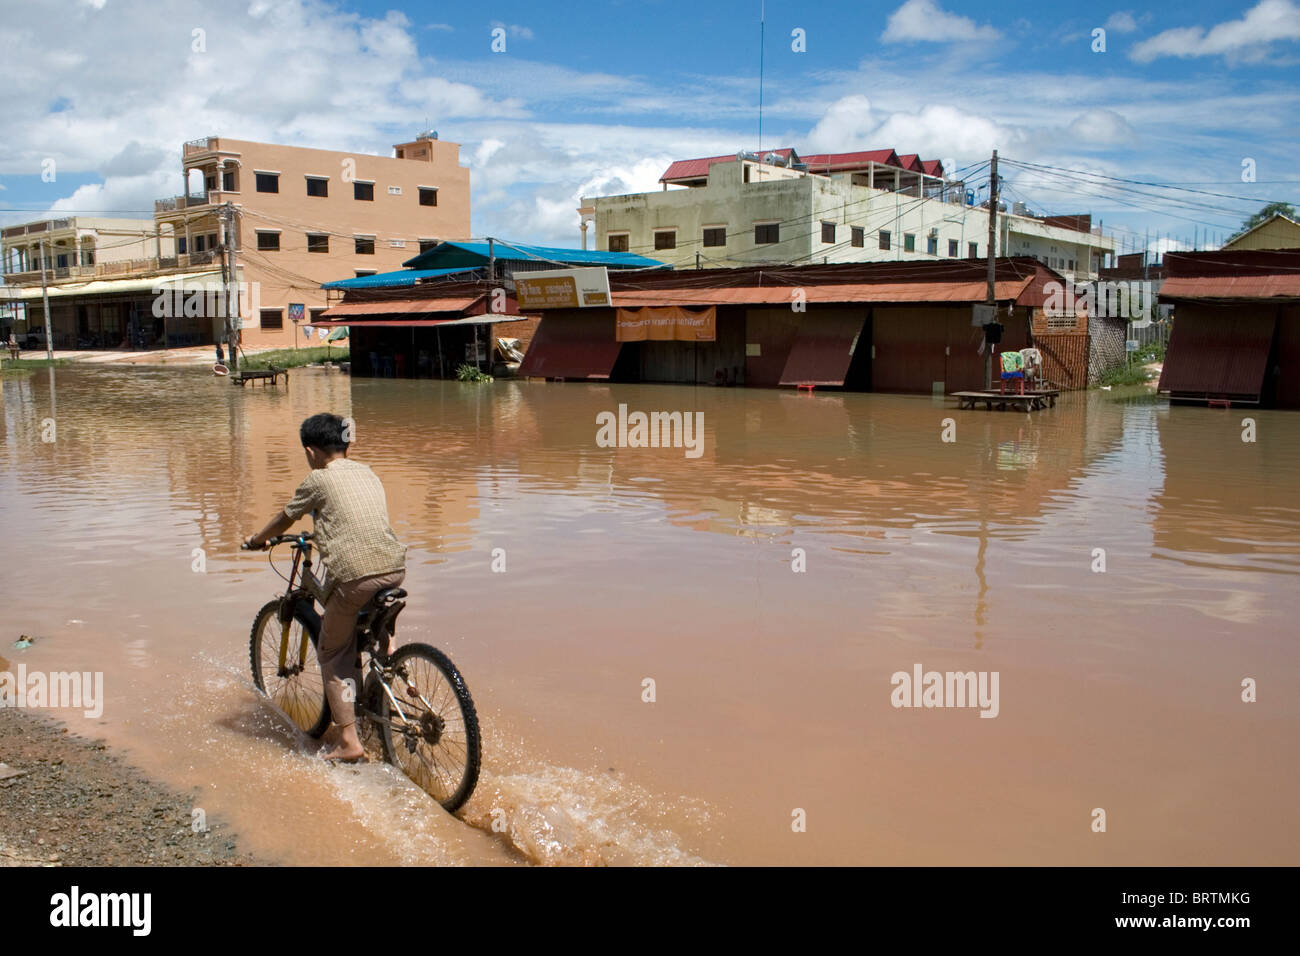 A boy on a bicycle rides through muddy water after the historic flood of 2009 in Siem Reap, Cambodia. Stock Photo